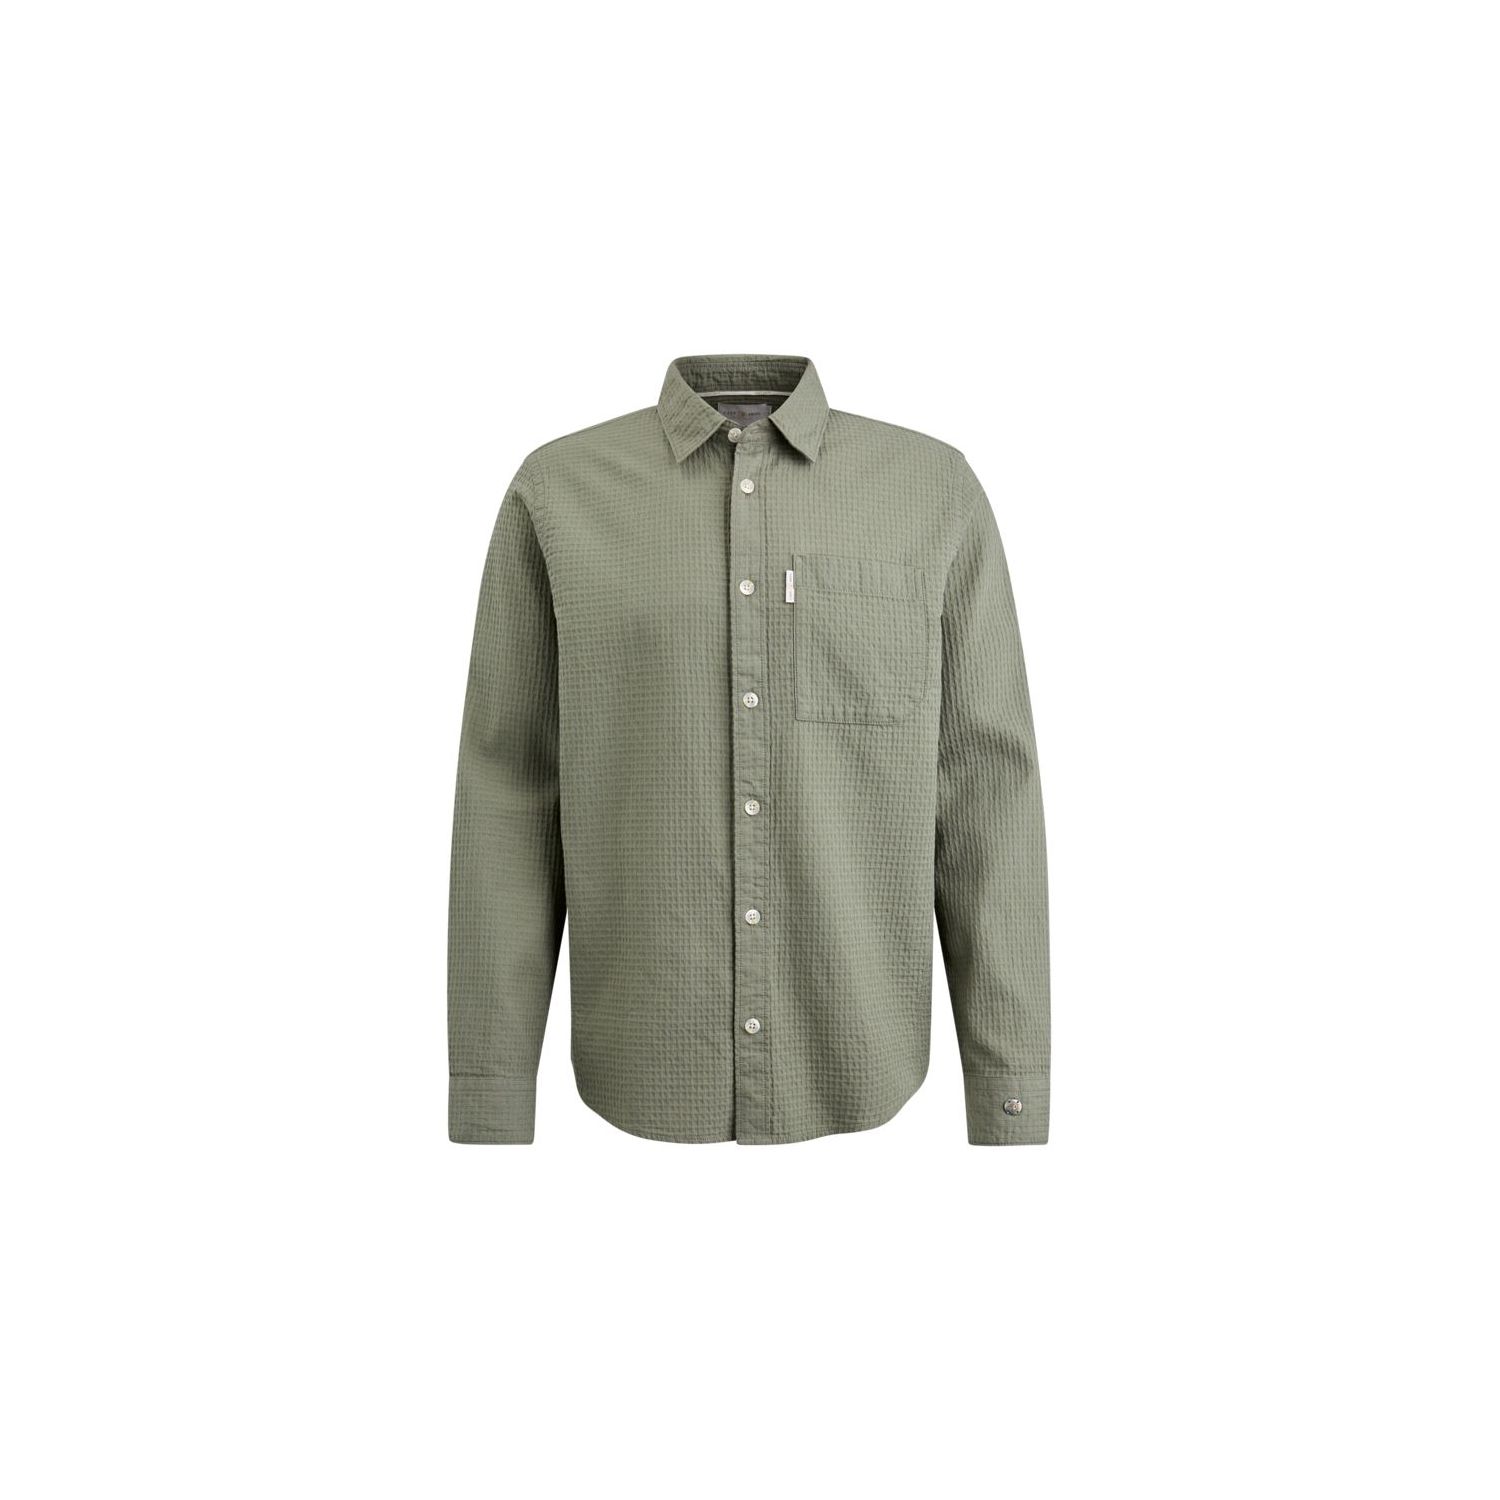 Cast Iron l/s shirt regualar fit mulled basil